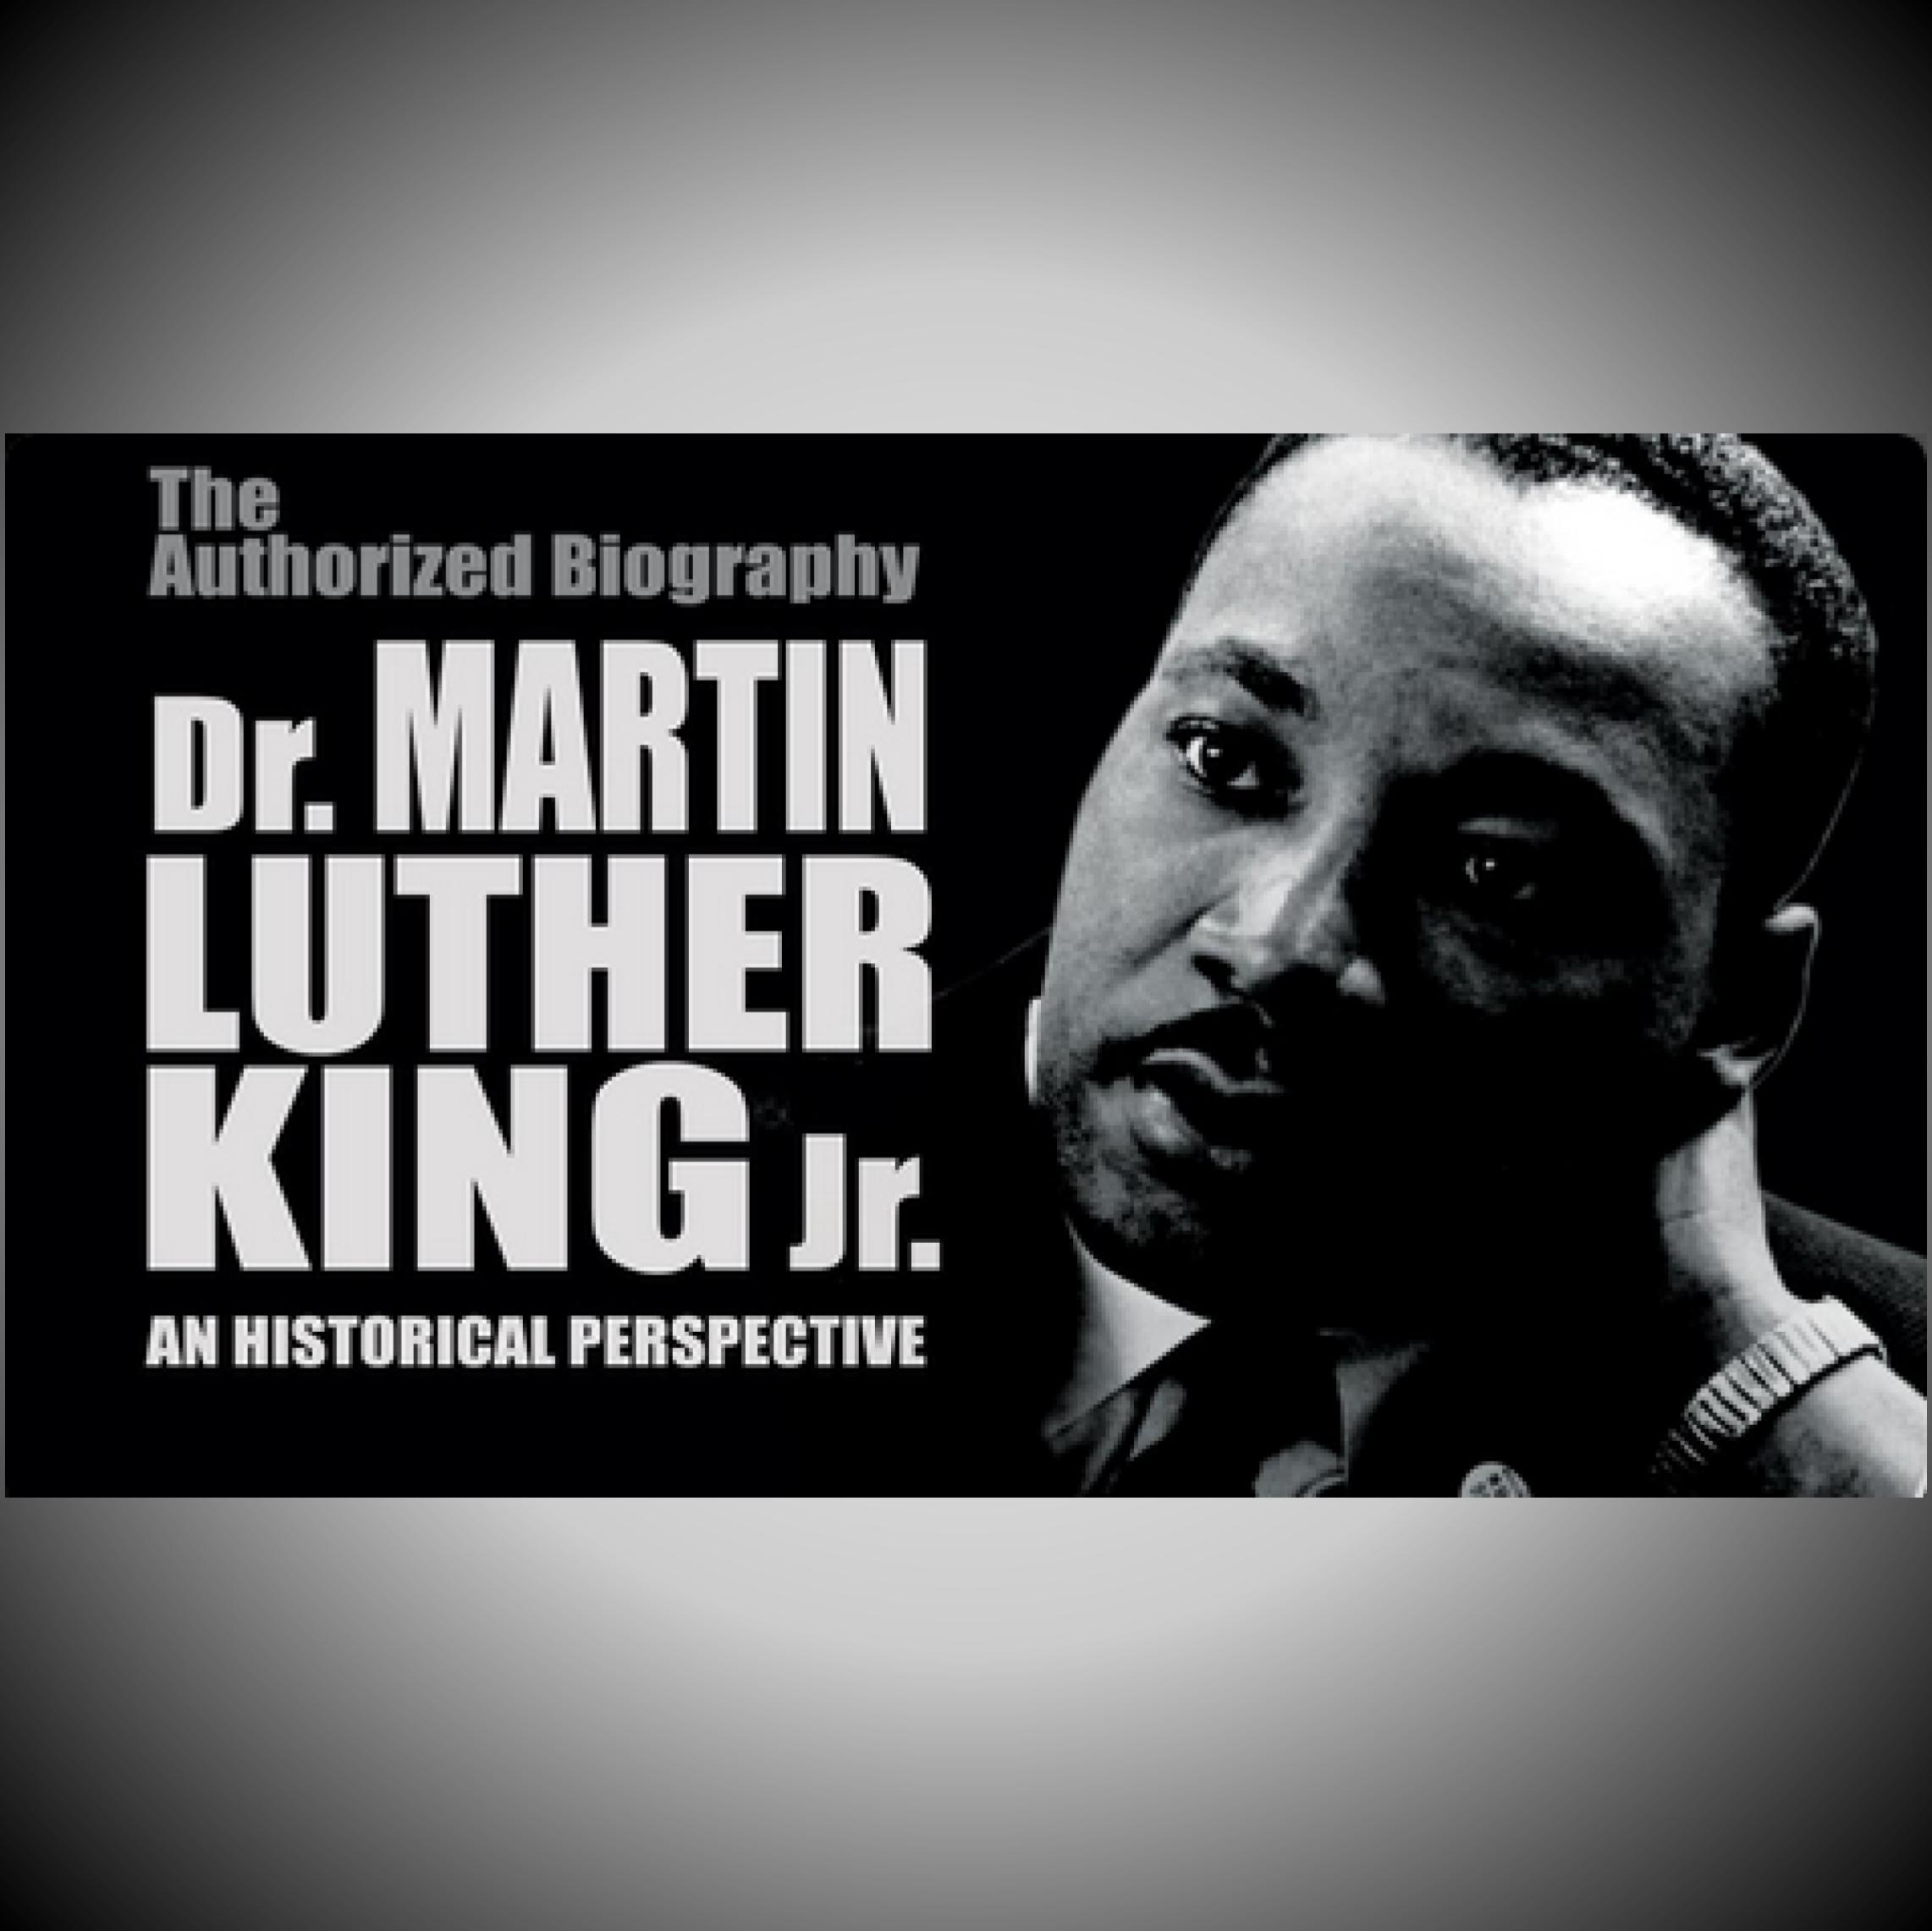 What's Up Doc? A Documentary Film Series on Human Rights: Dr. Martin Luther King Jr: A Historical Perspective